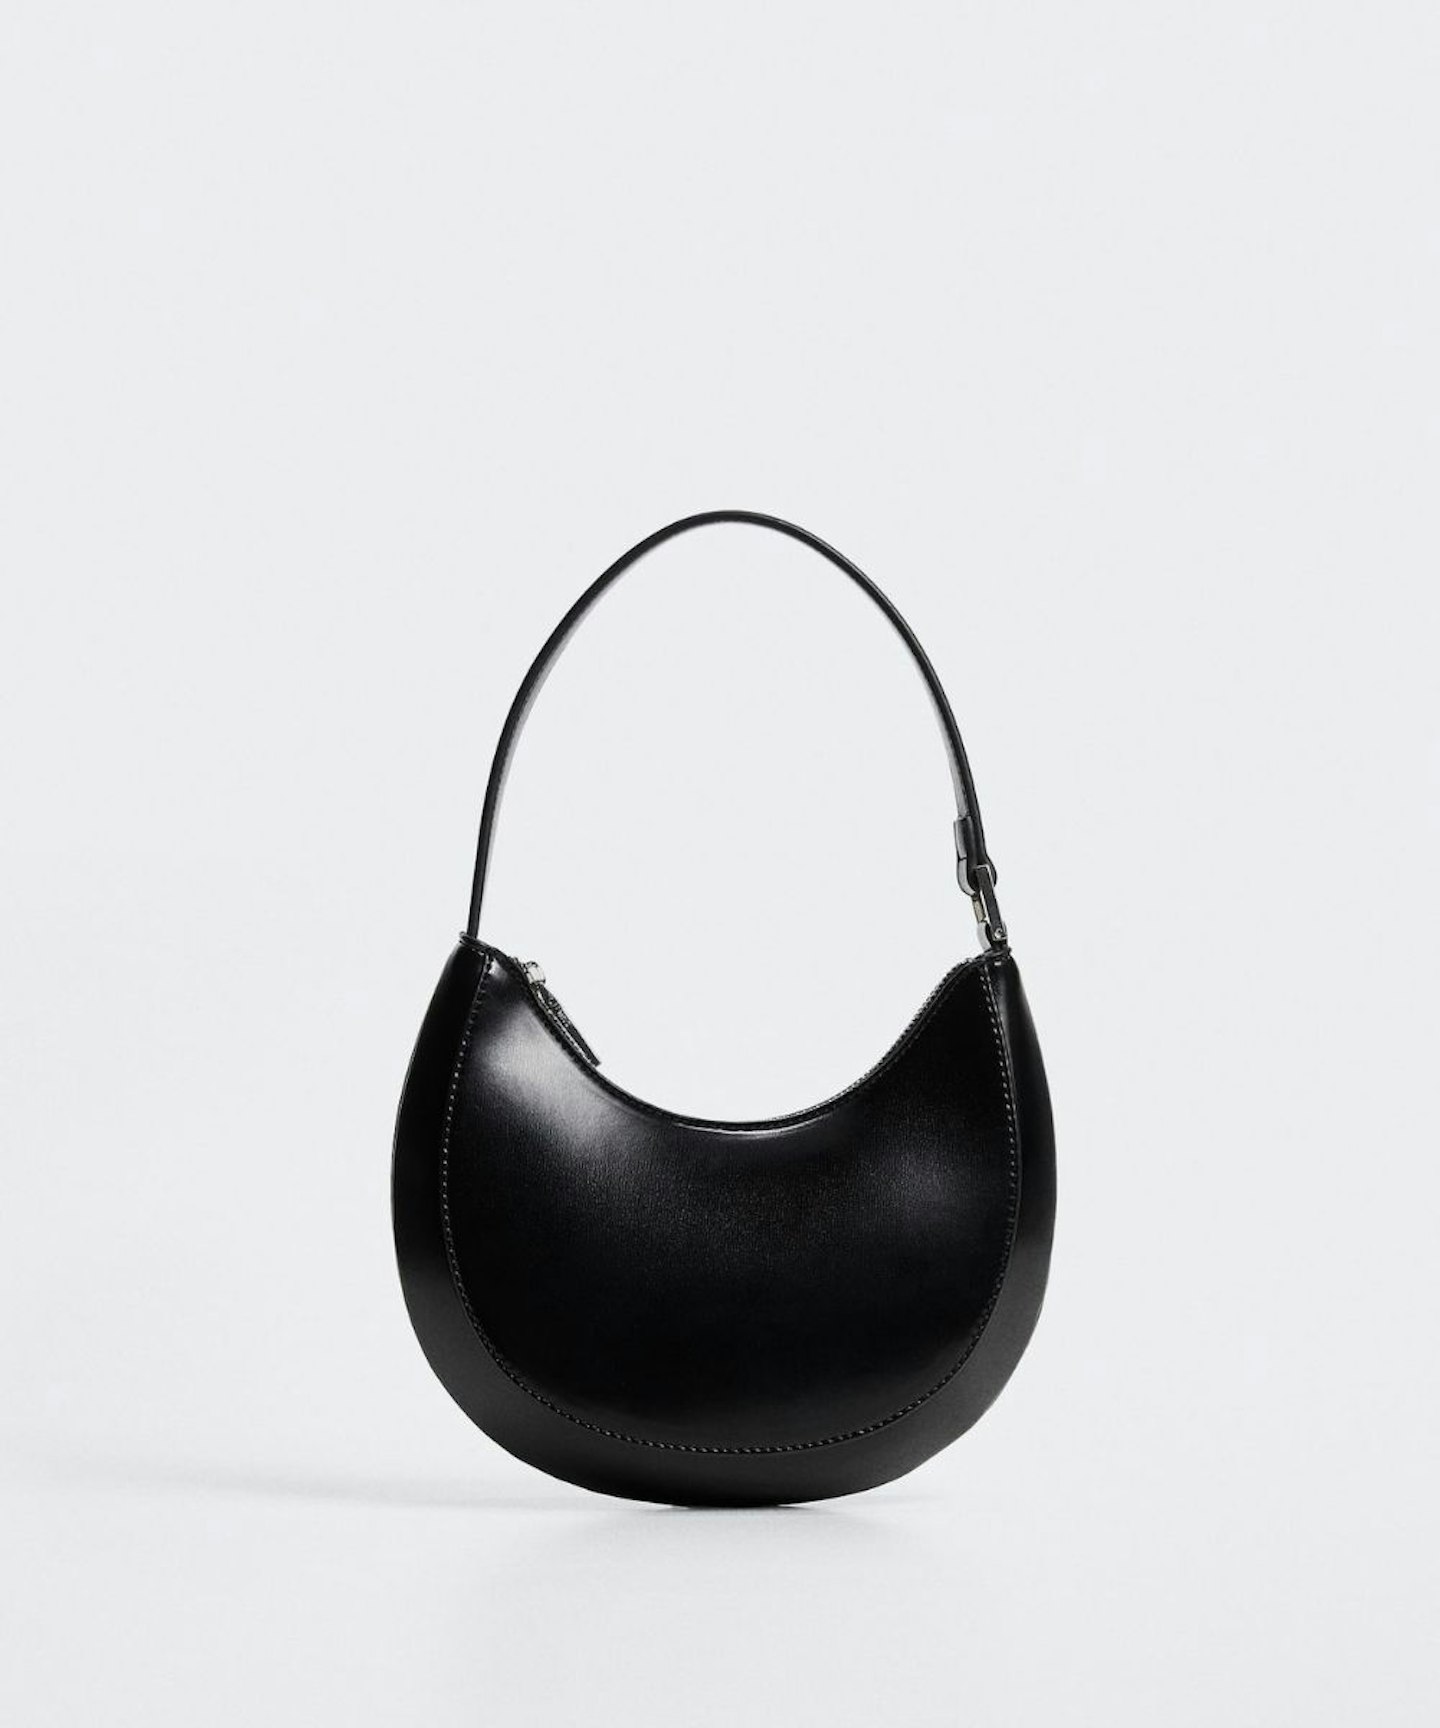 H&M's dupe of Prada's Cleo leather shoulder bag will save you